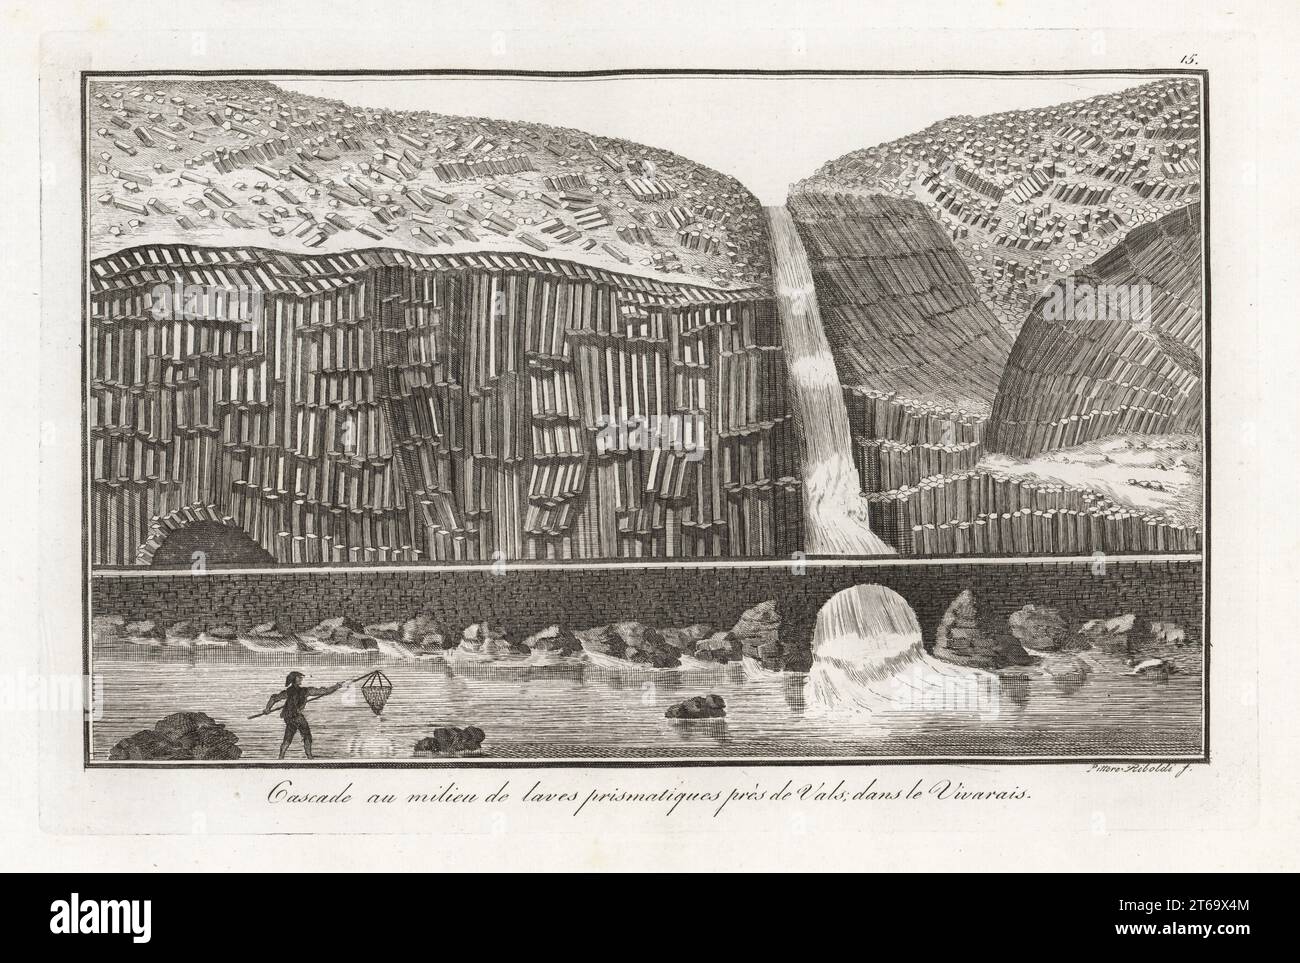 Waterfall in the middle of prismatic lava near Vals, Vivarais/Ardeche range, France. A fisherman uses a net in the river. Cascade au milieu de laves prismatiques pres de Vals dans le Vivarais. Copperplate engraving by Milanese painter Gaetano Riboldi from Scipion Breislaks Traite sur la Structure Exterieure du Globe, Treatise on the Exterior Structure of the Globe, Jean-Pierre Giegler, Milan, 1822. Stock Photo